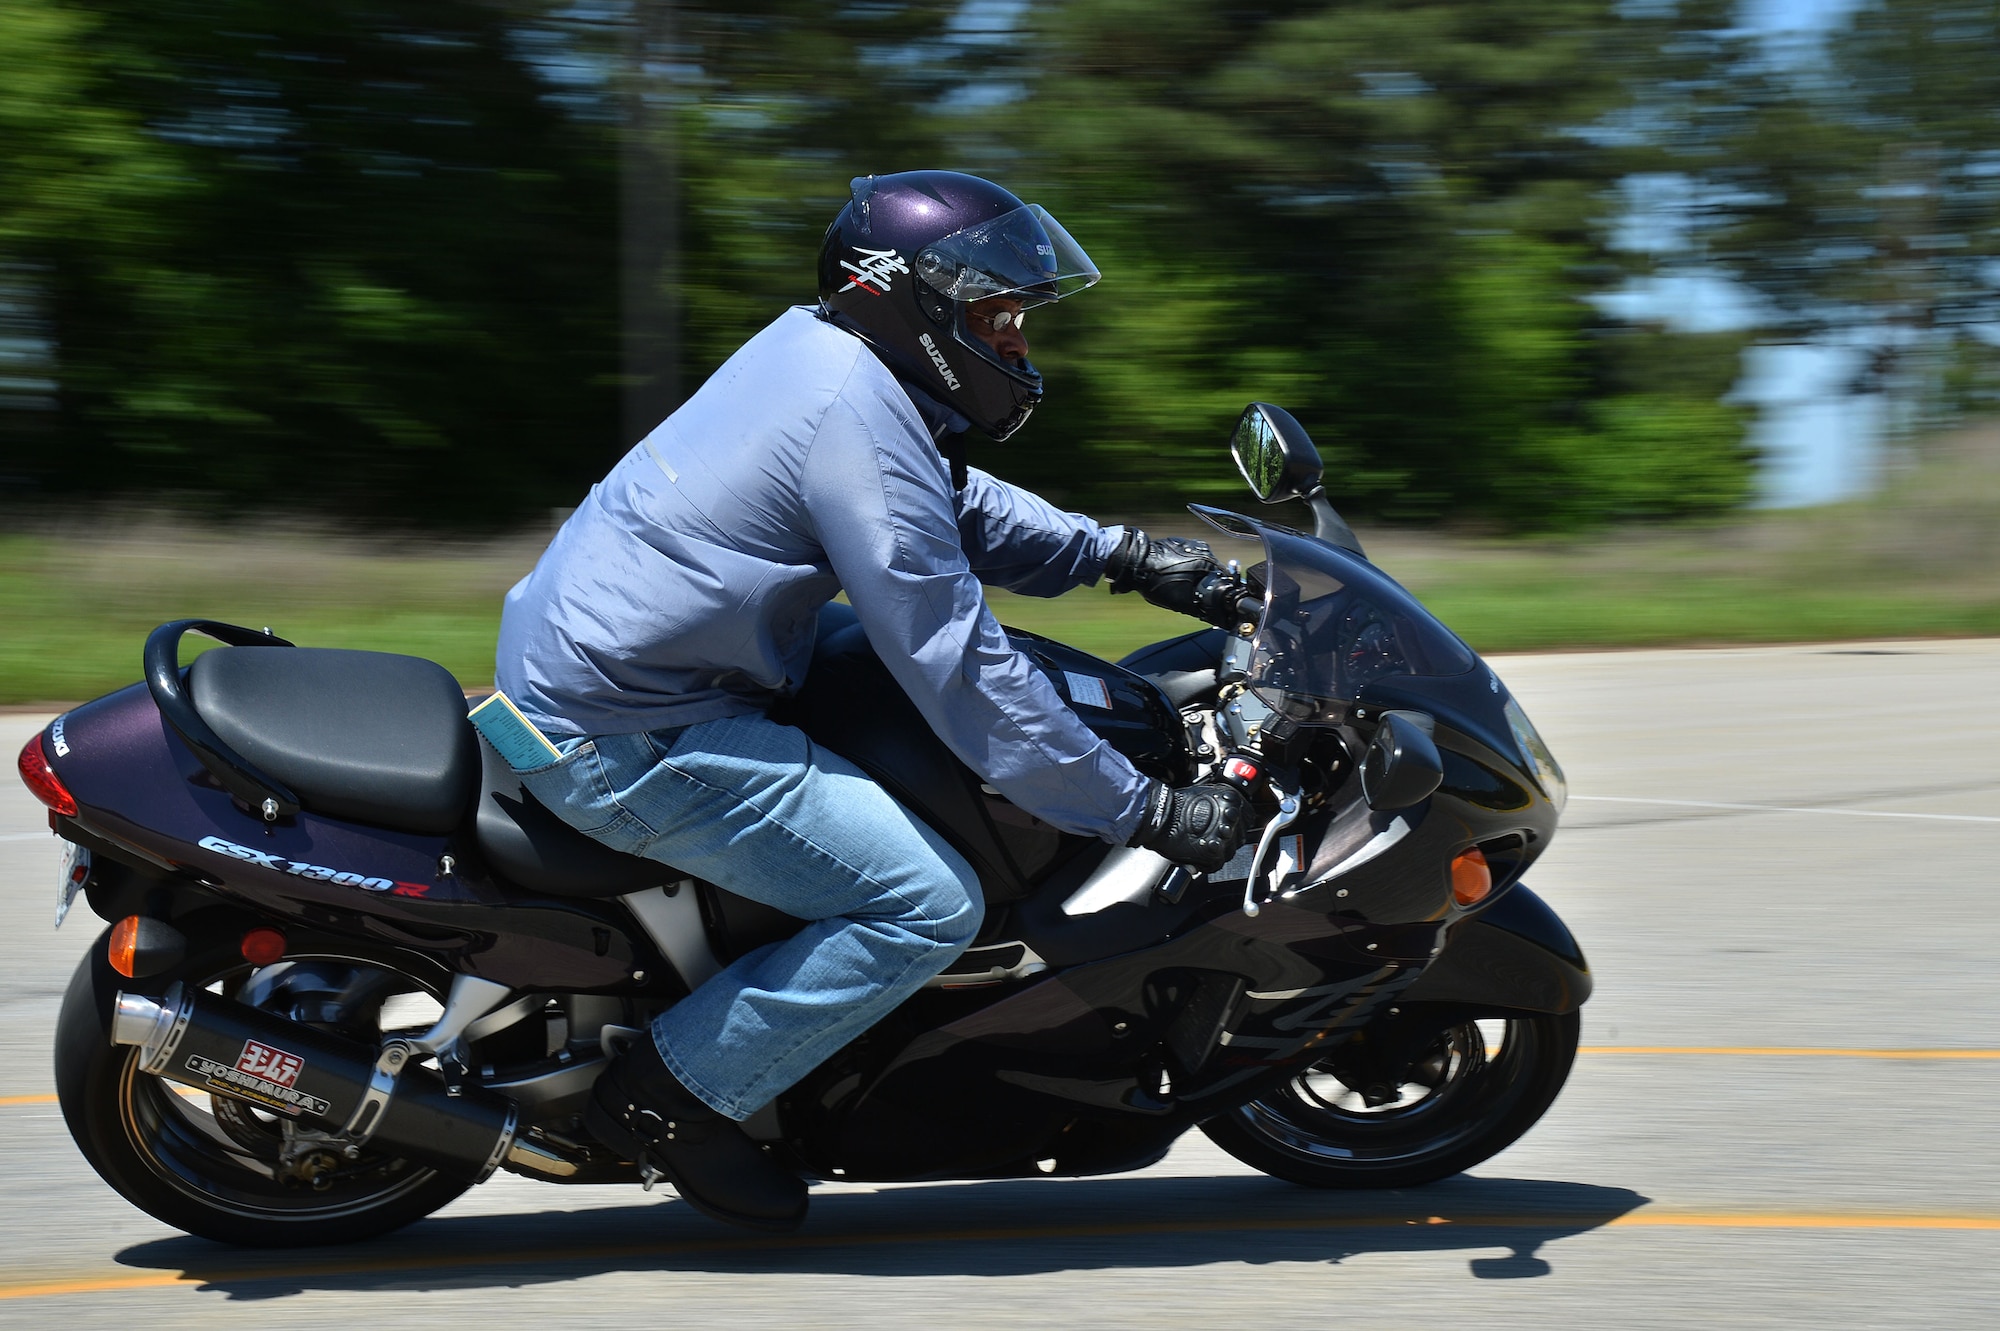 A student of the Rider Coach Preparation Workshop rides around a turn at Shaw Air Force Base, S.C., April 22, 2015. During the seven-day course the students learned and executed motorcycle skills and techniques in preperation to teach mototcycle courses on base. (U.S. Air Force photo by Airman 1st Class Michael Cossaboom/Released)